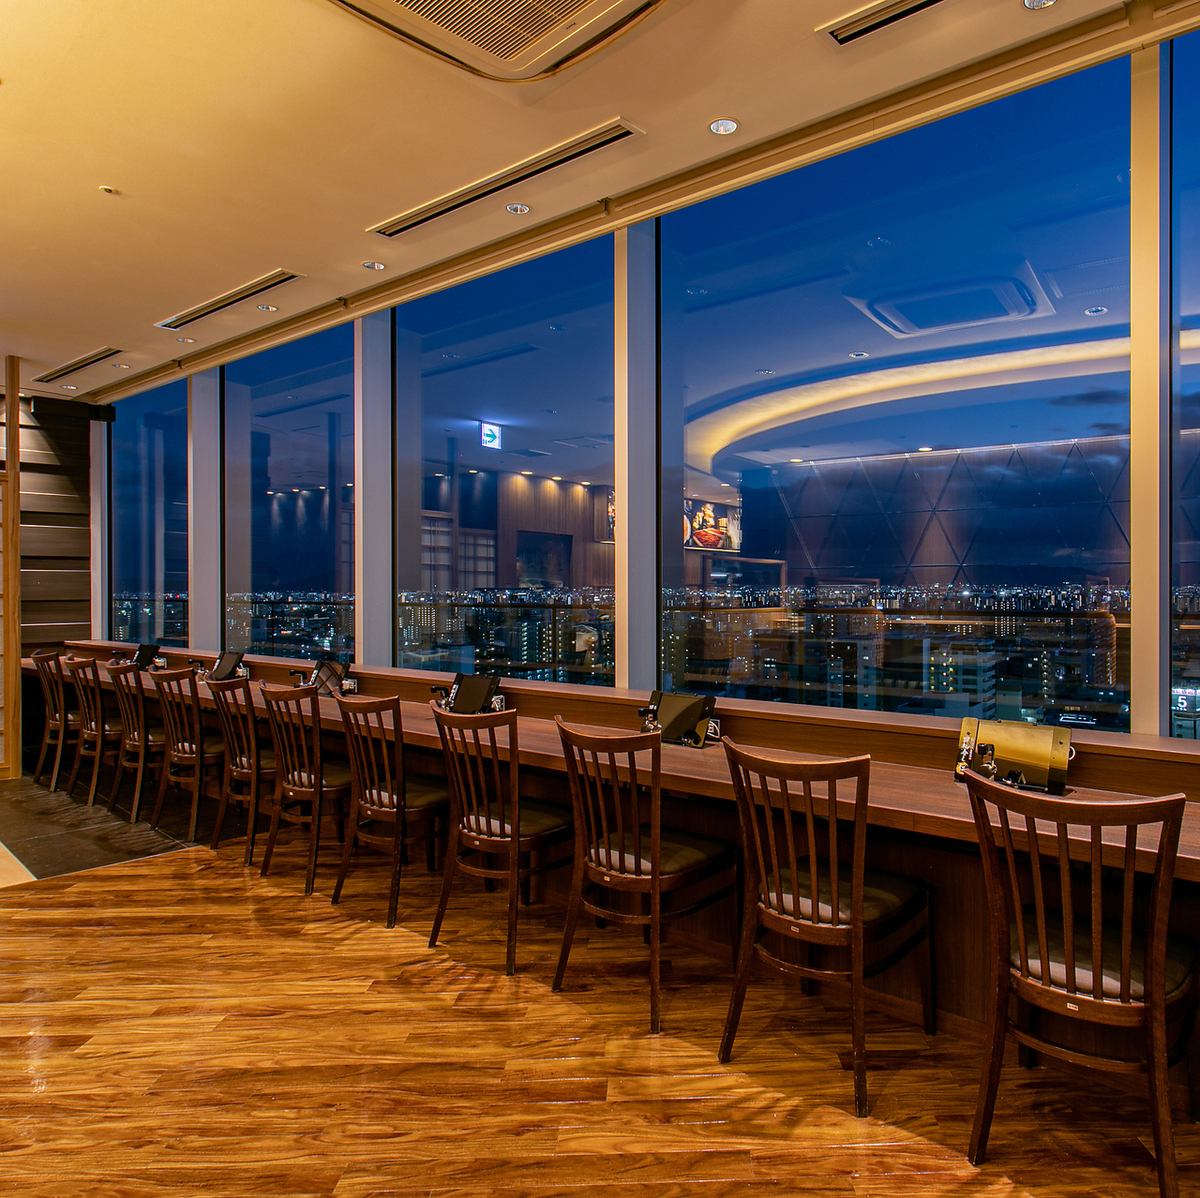 Abeno Harukas 13th floor ★ Popular counter seats with a view of the night view